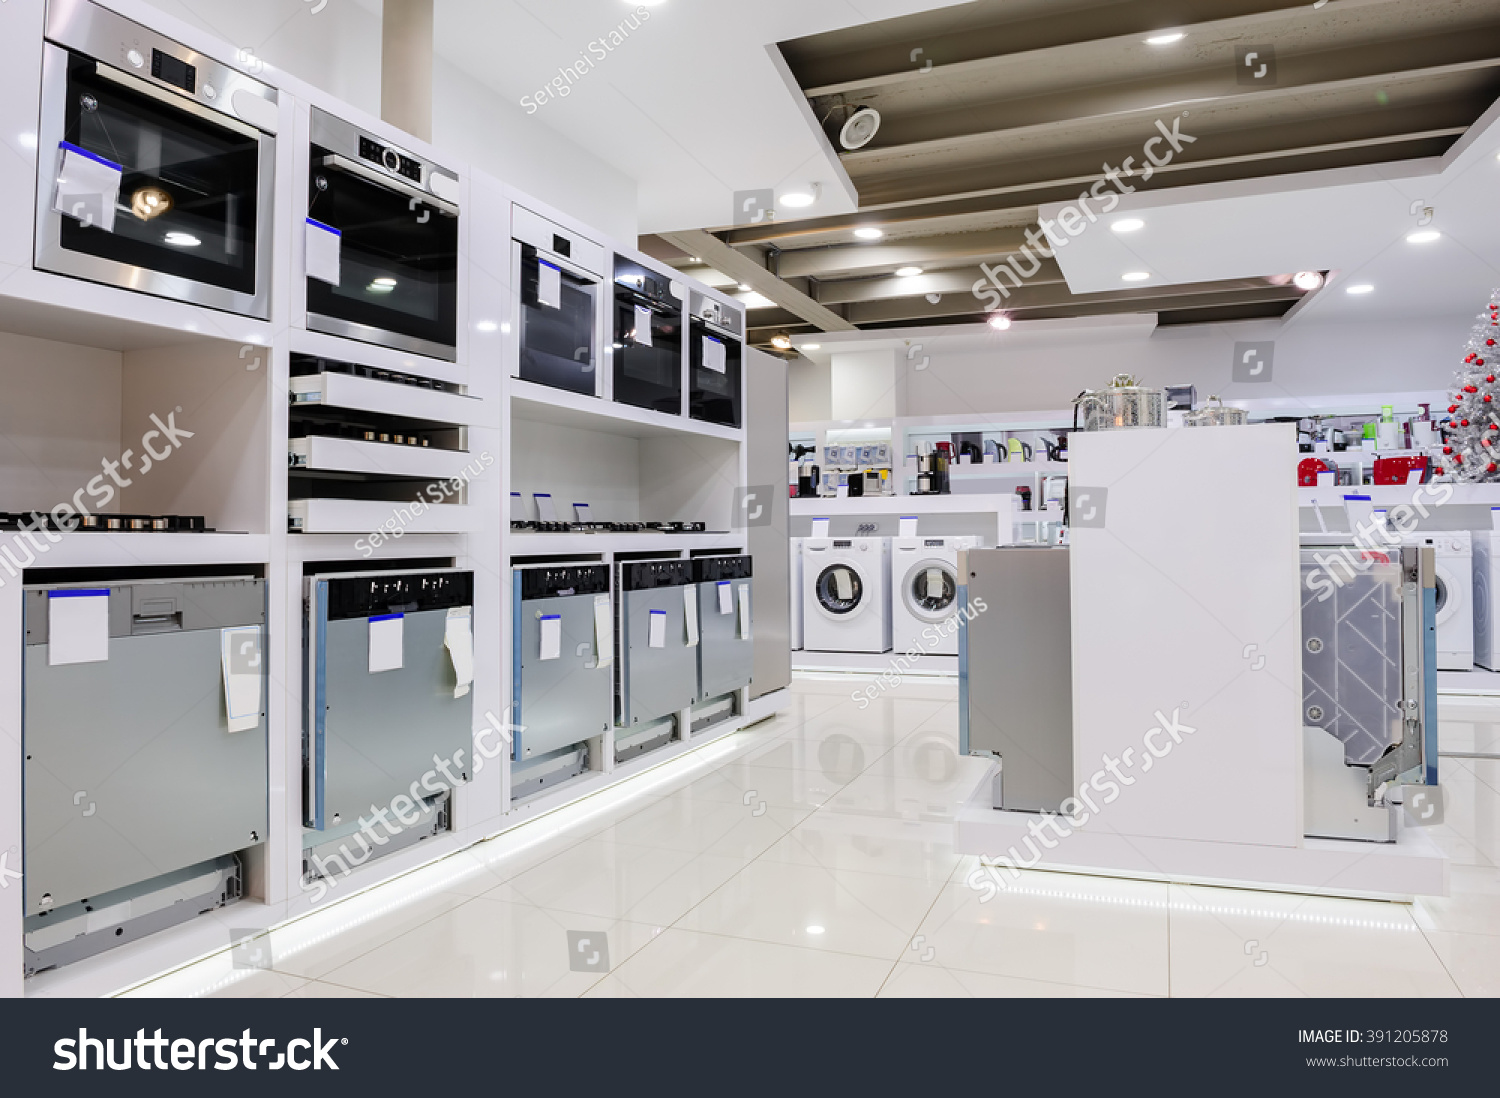 Home appliance in the store #391205878